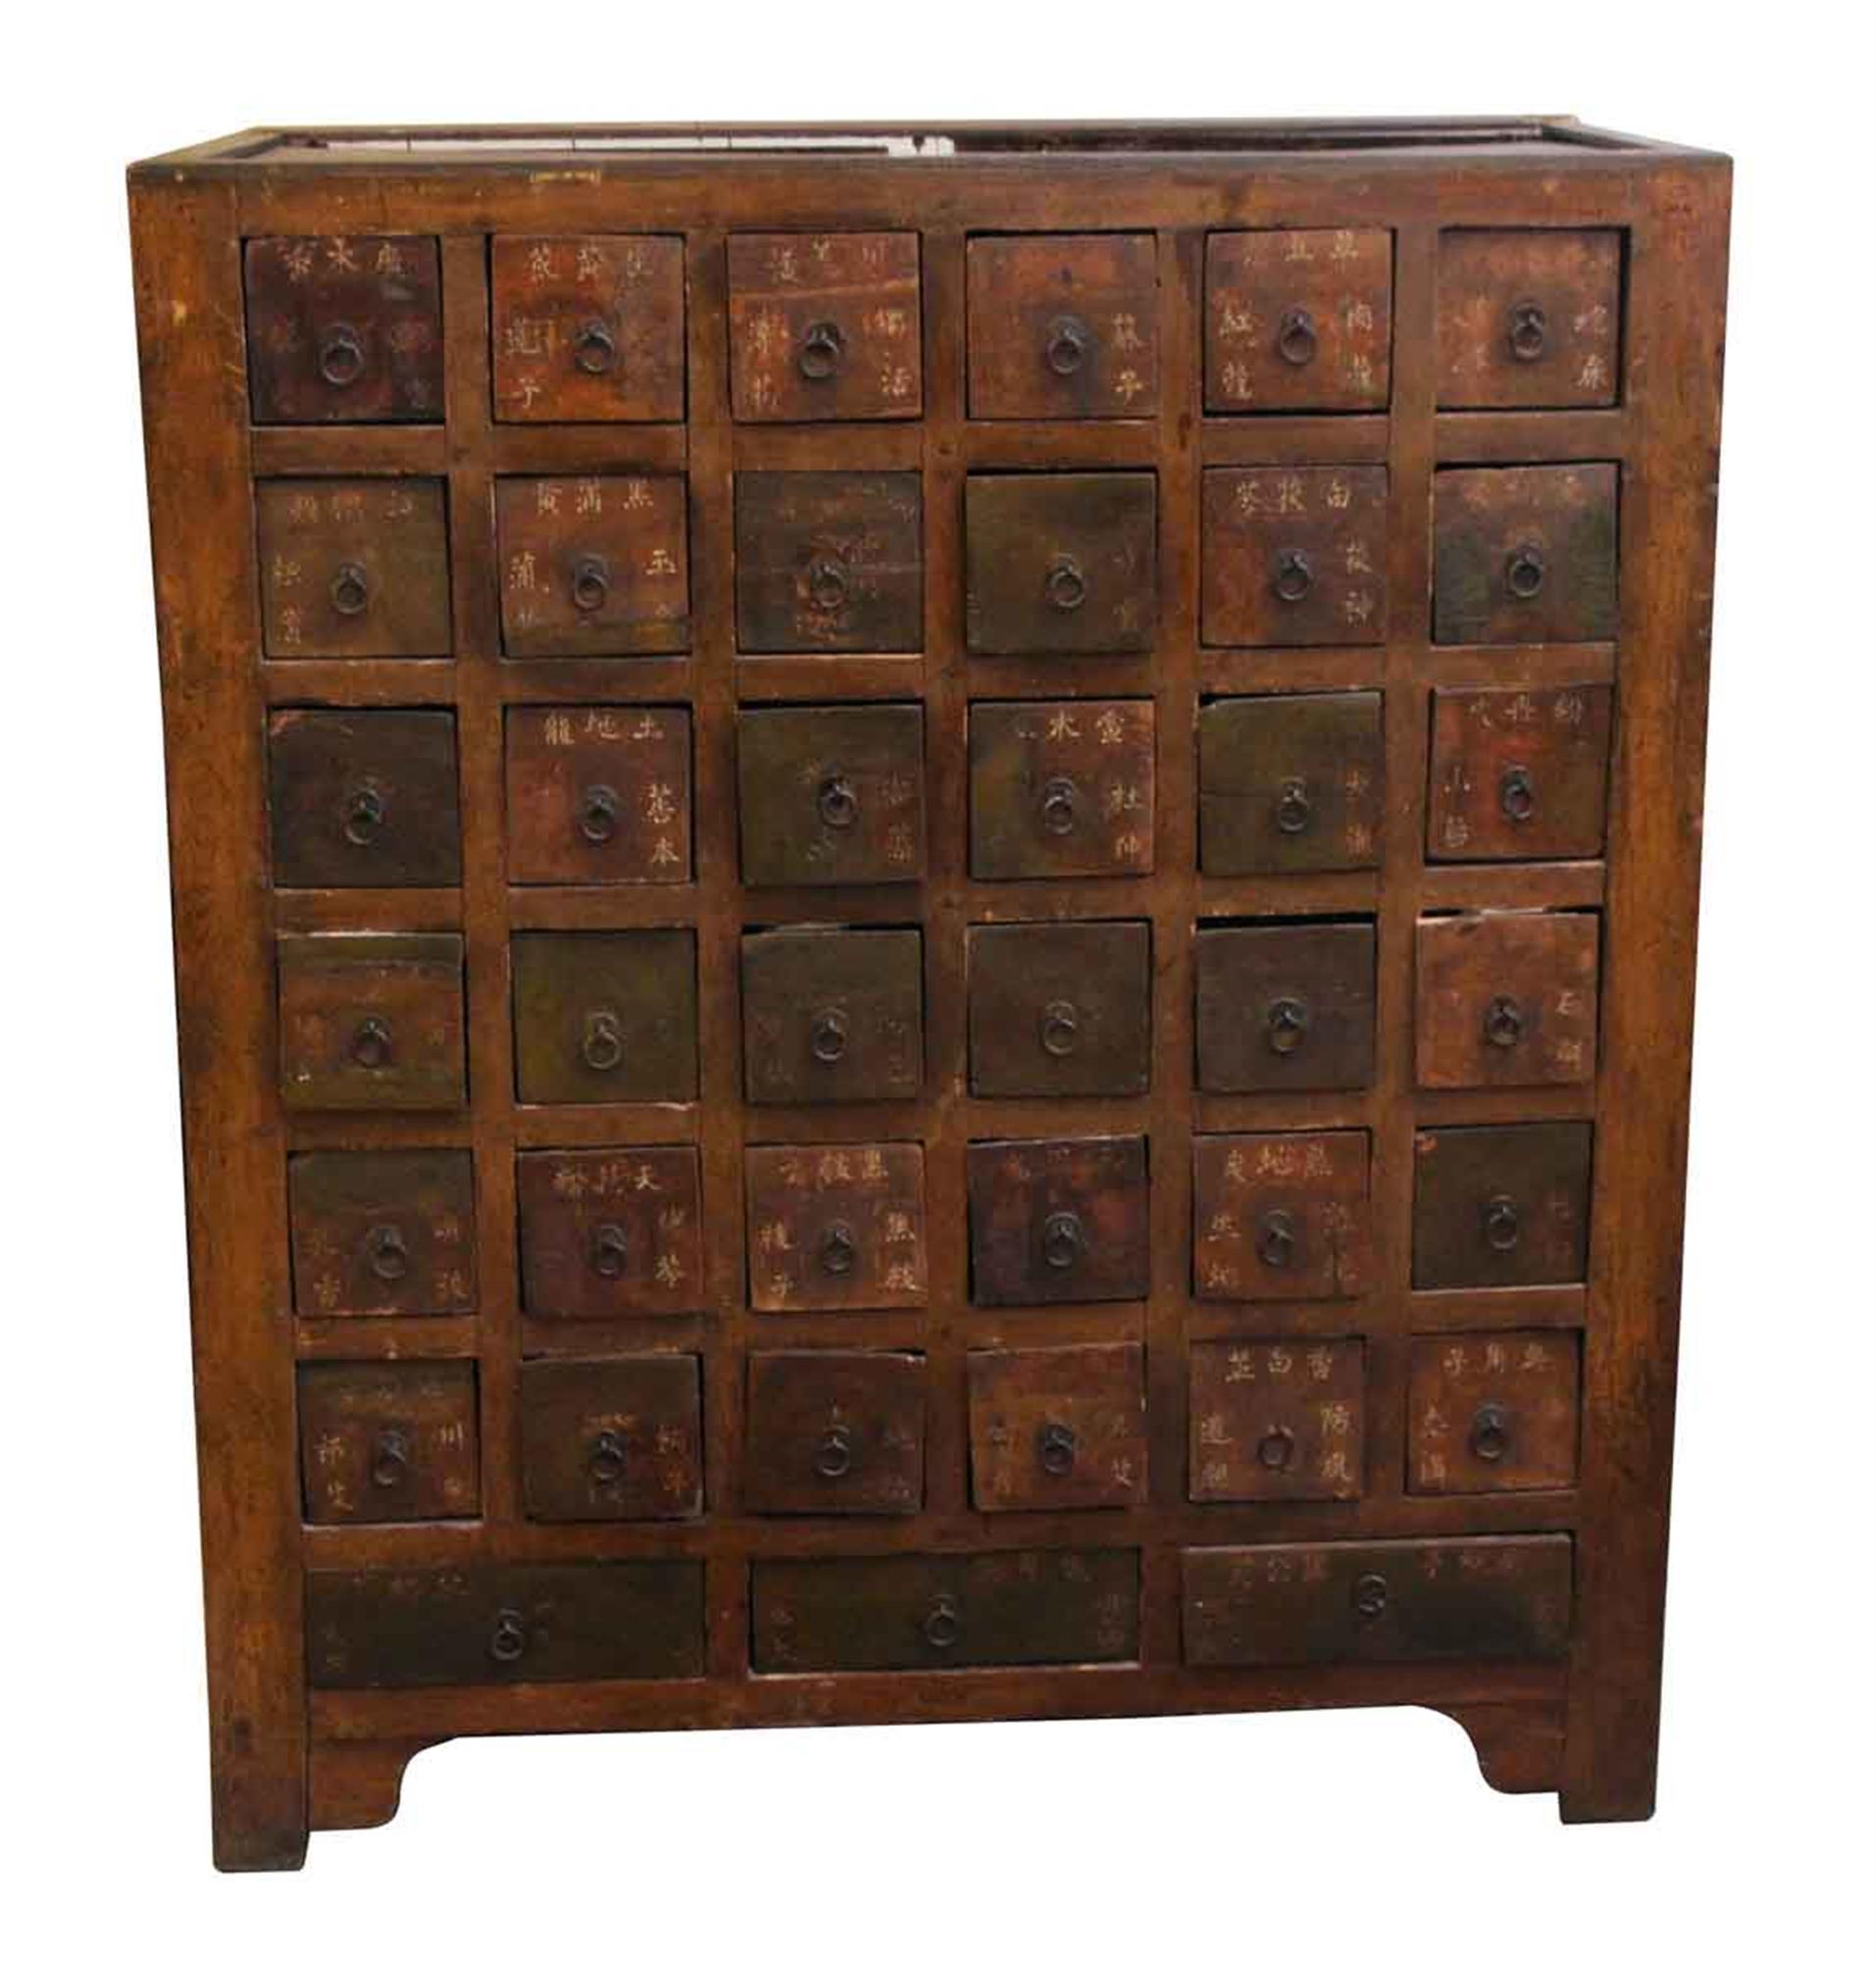 1950s Chinese Wood Apothecary Cabinet with 36 Drawers